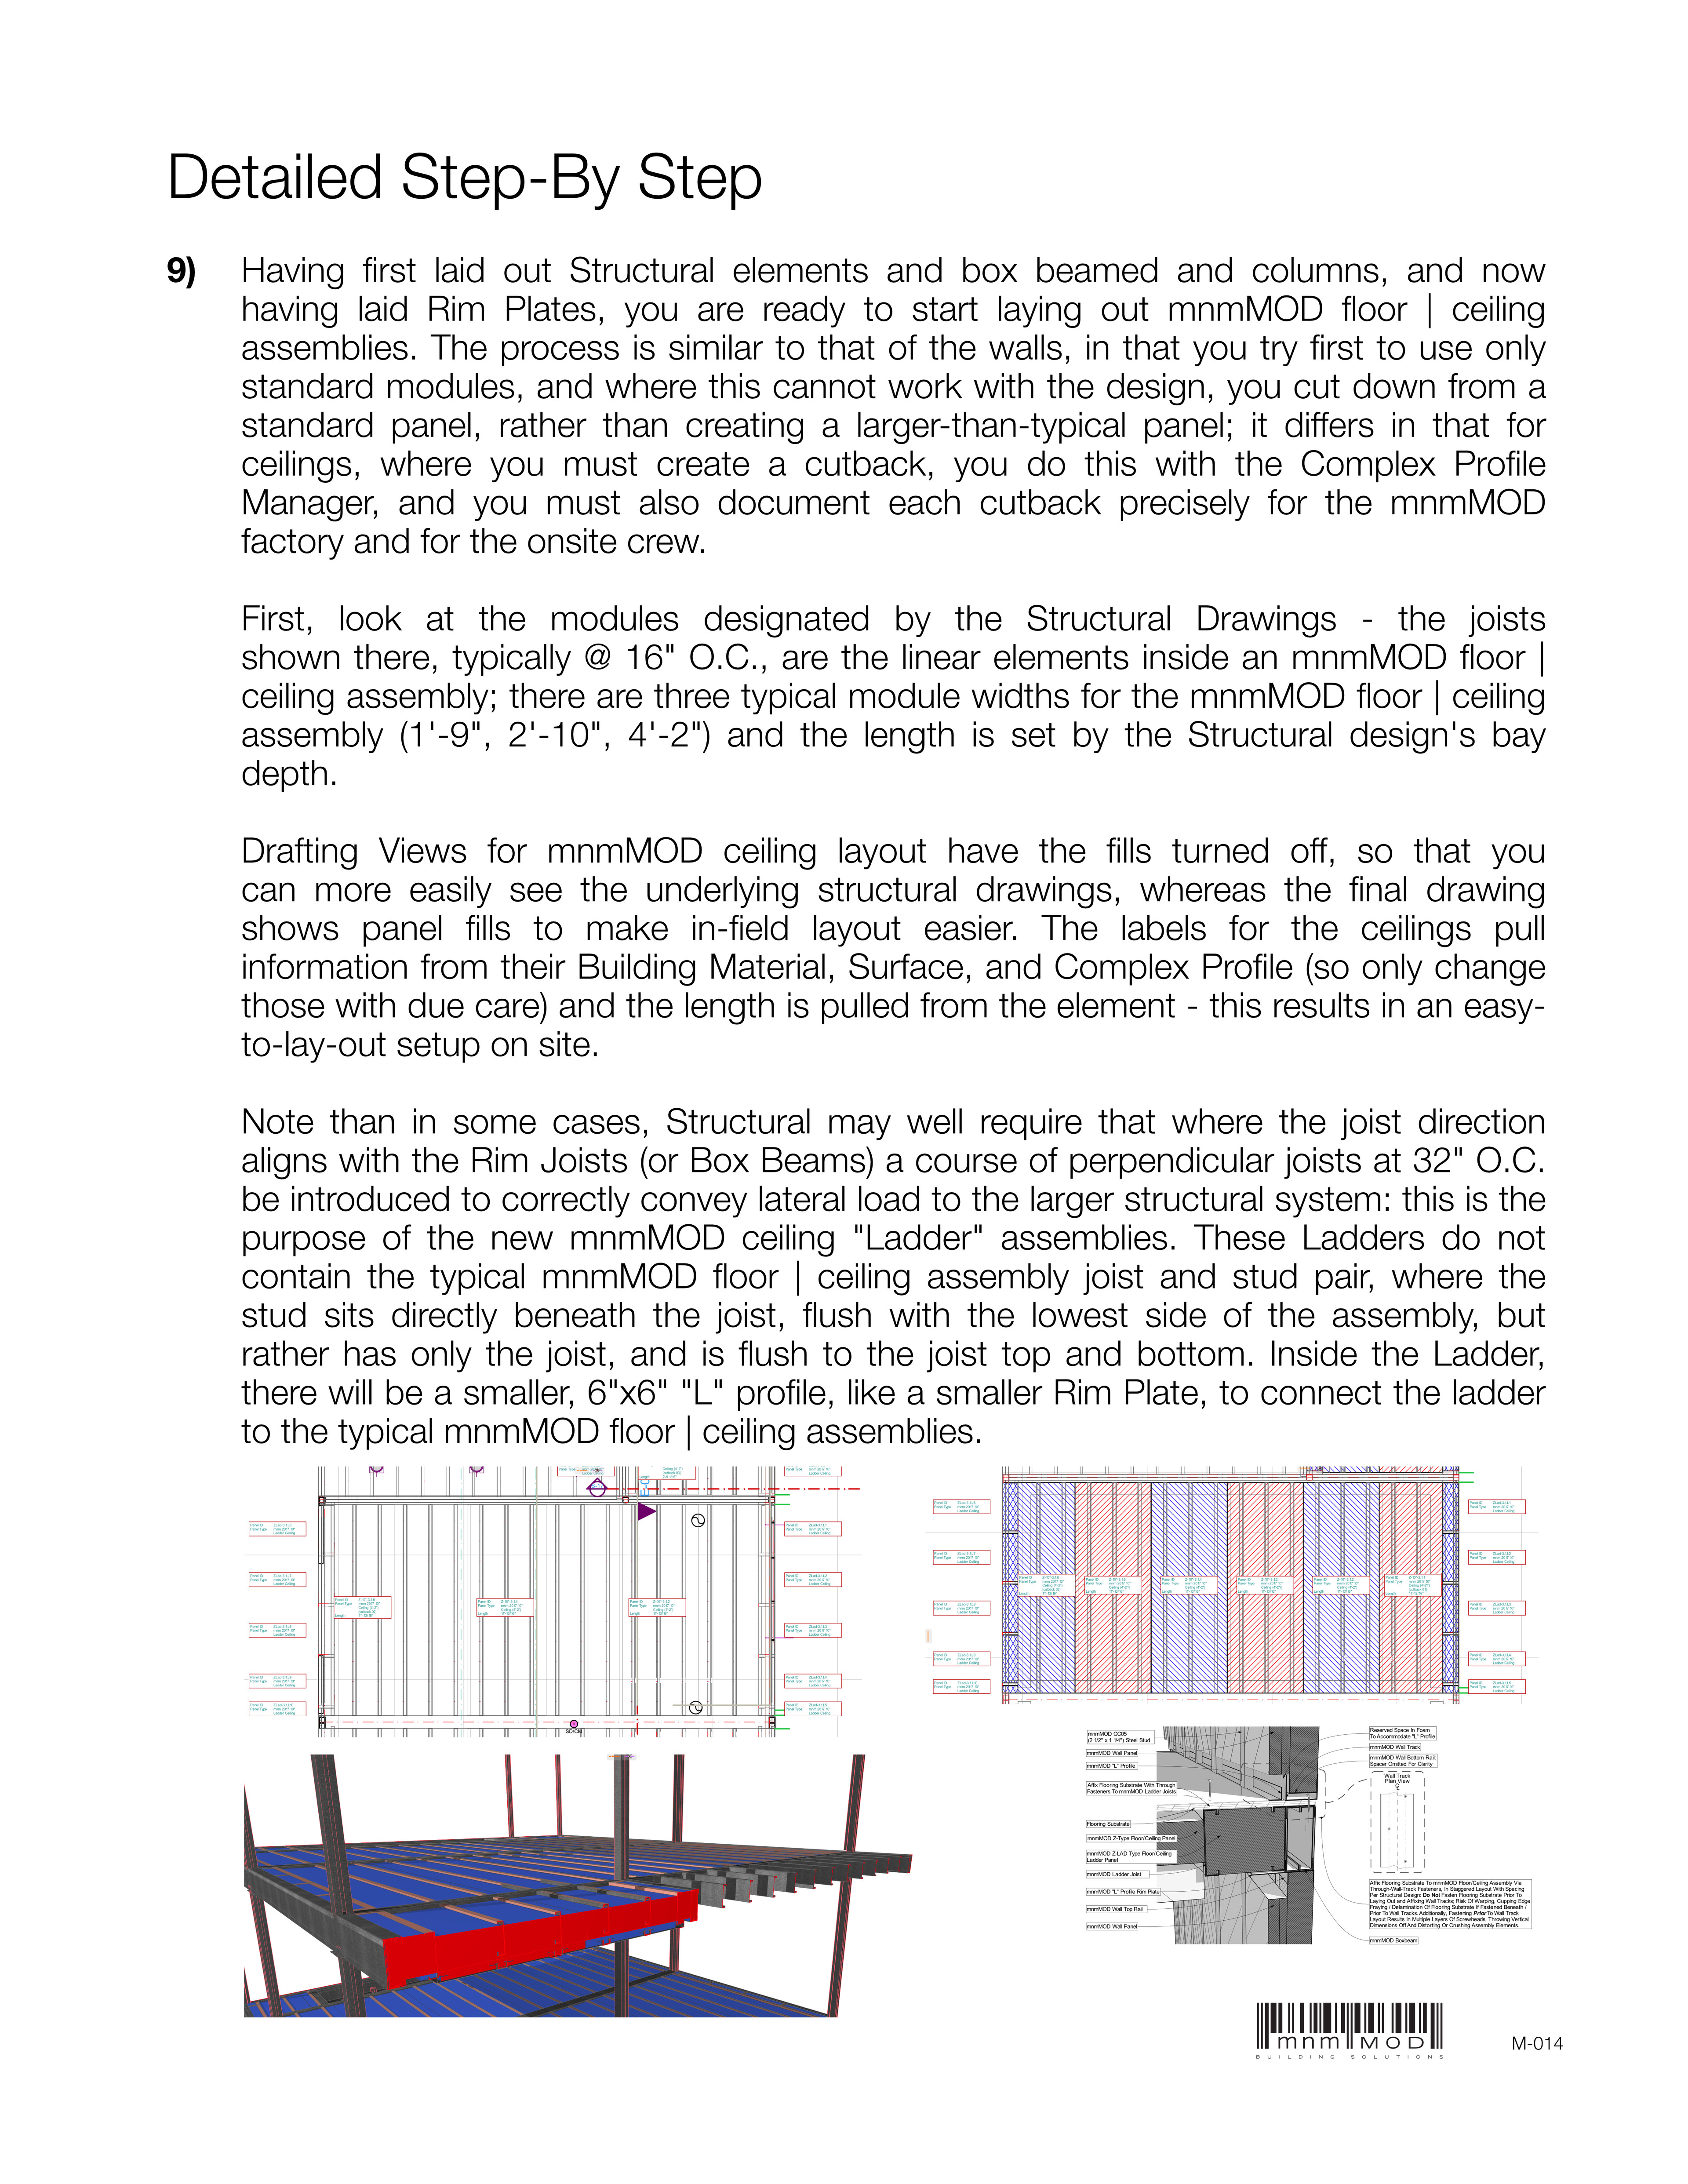 Old Work - Excerpt only of technical documentation of new mnmMOD system design tools, new design approach and new documentation [all my work]